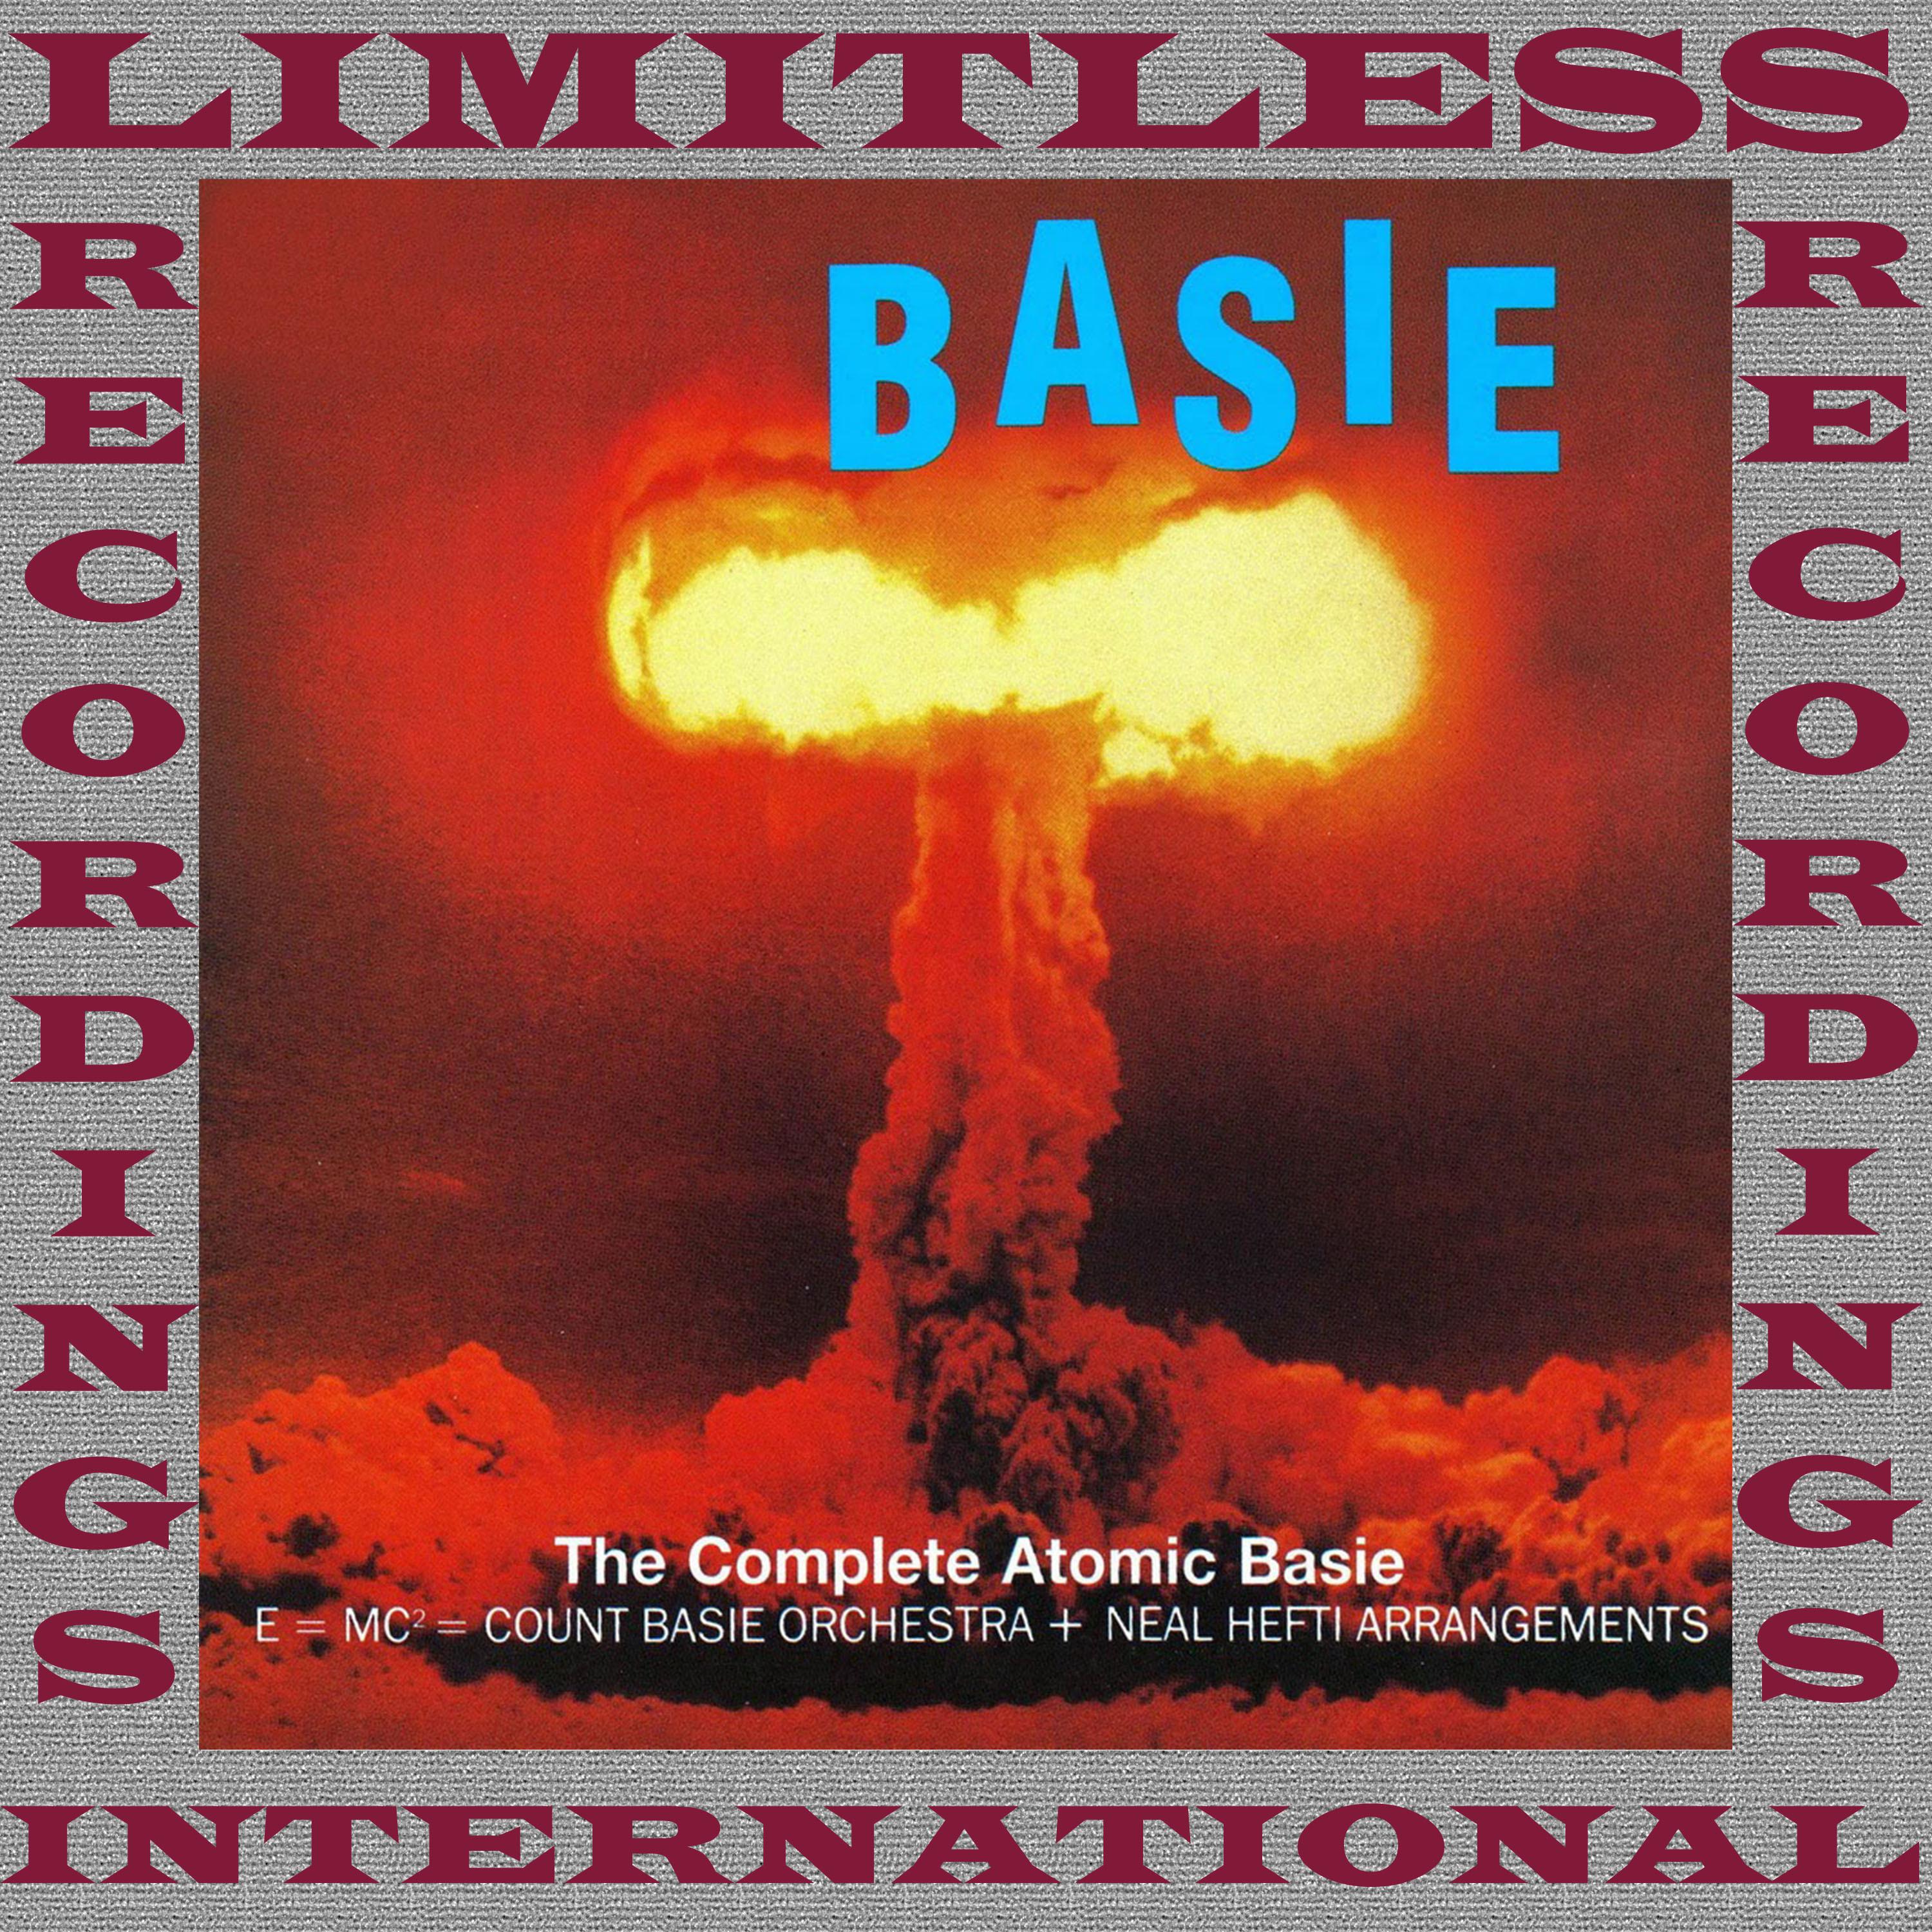 The Complete Atomic Basie (Remastered Version)